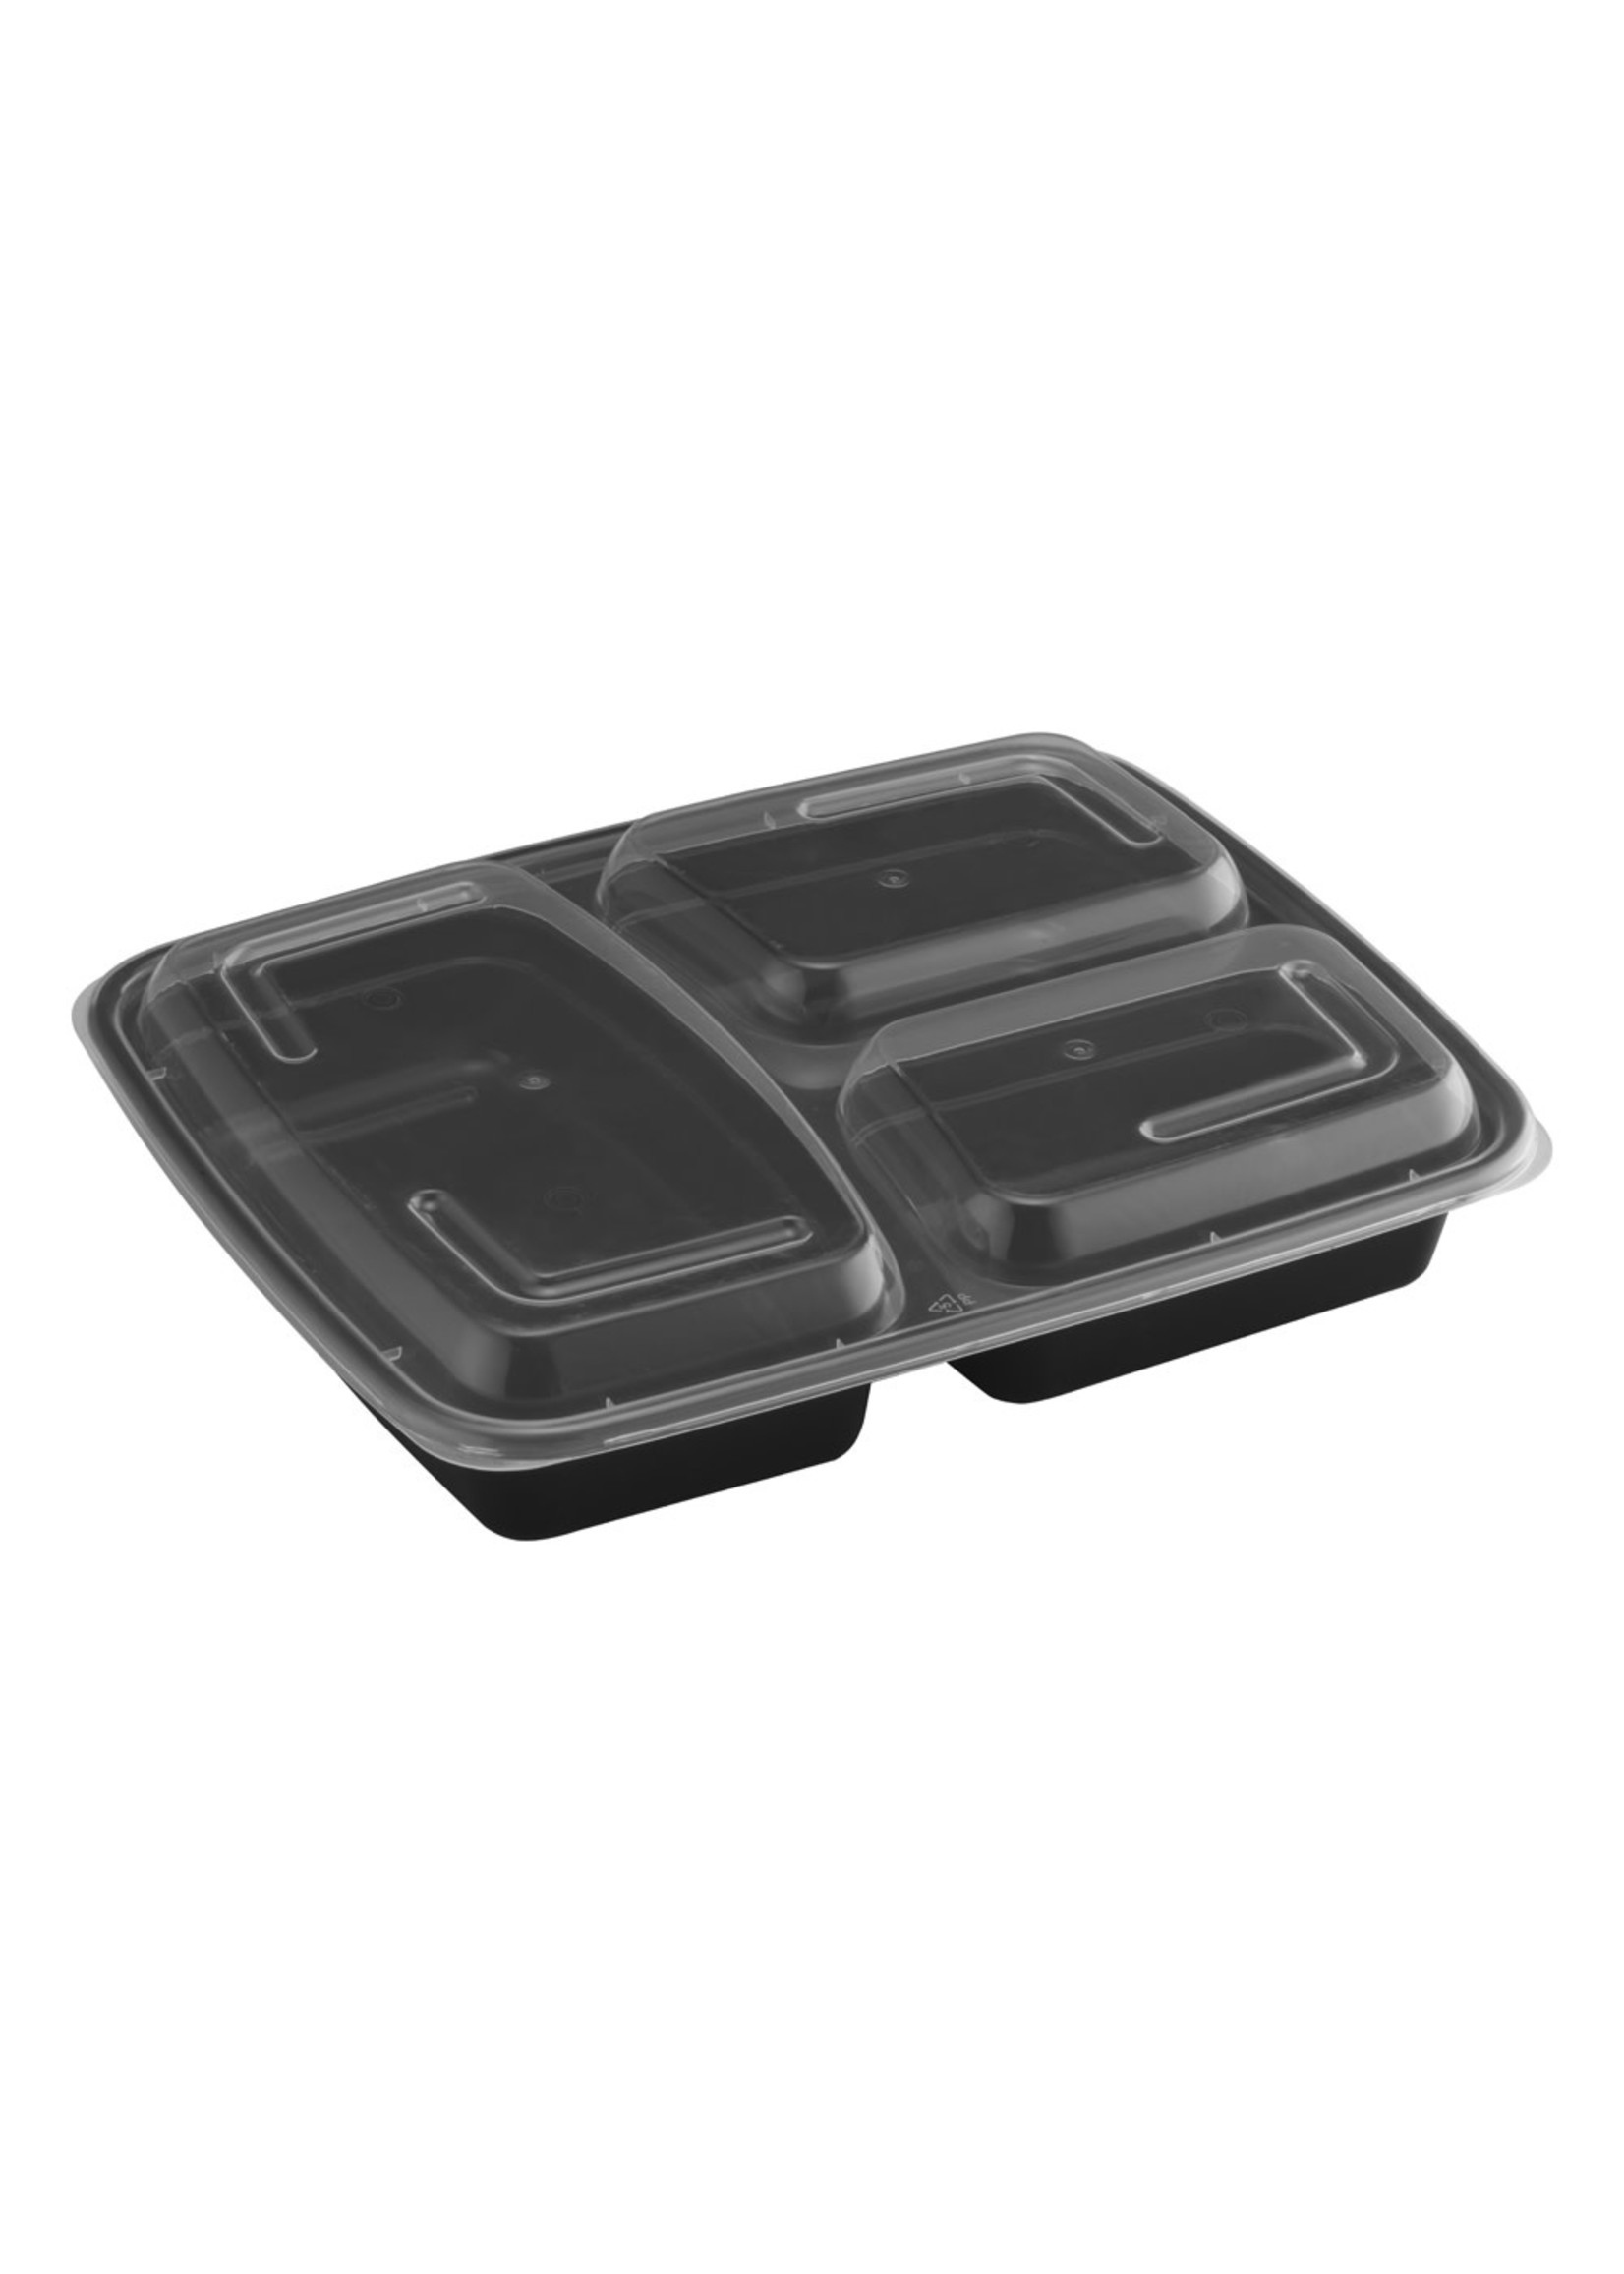 Gladway TY-339 / RCT339 - 39oz Rectangular Microwaveable Container with Lid 3-compartment, 150 sets (50/6)